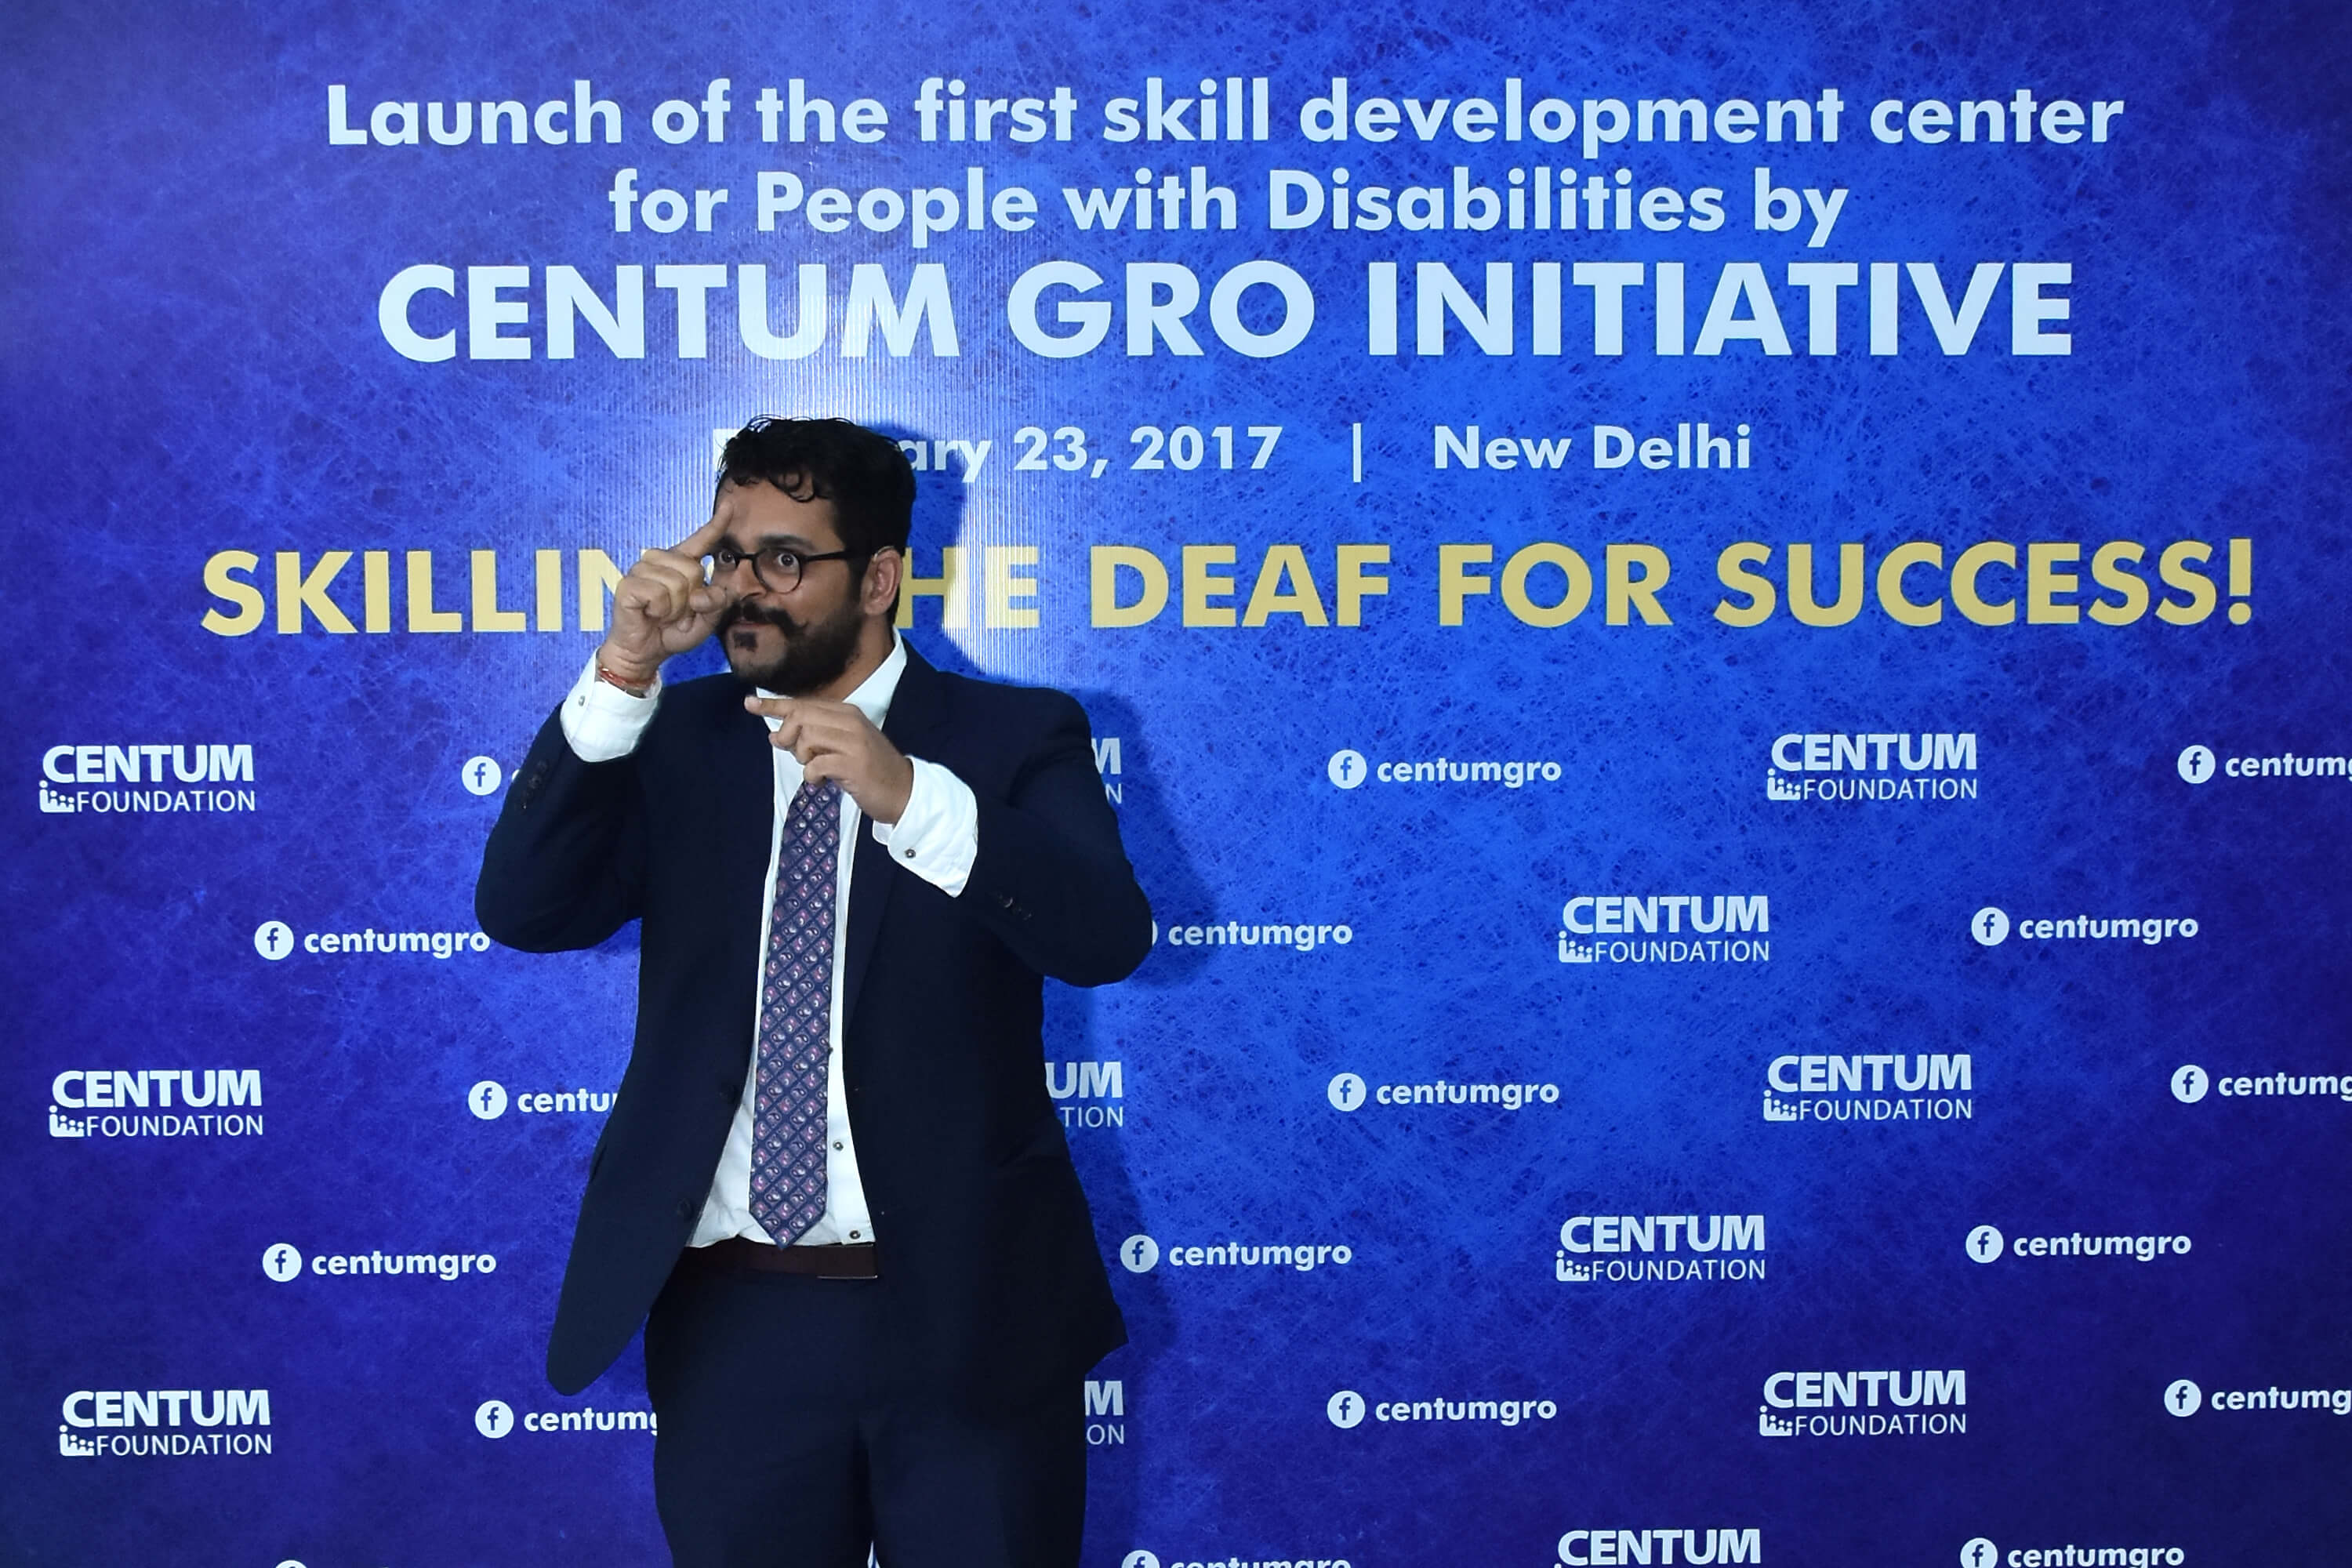 Deaf candidates face multiple challenges in job markets: Interview with AVP – Centum Foundation